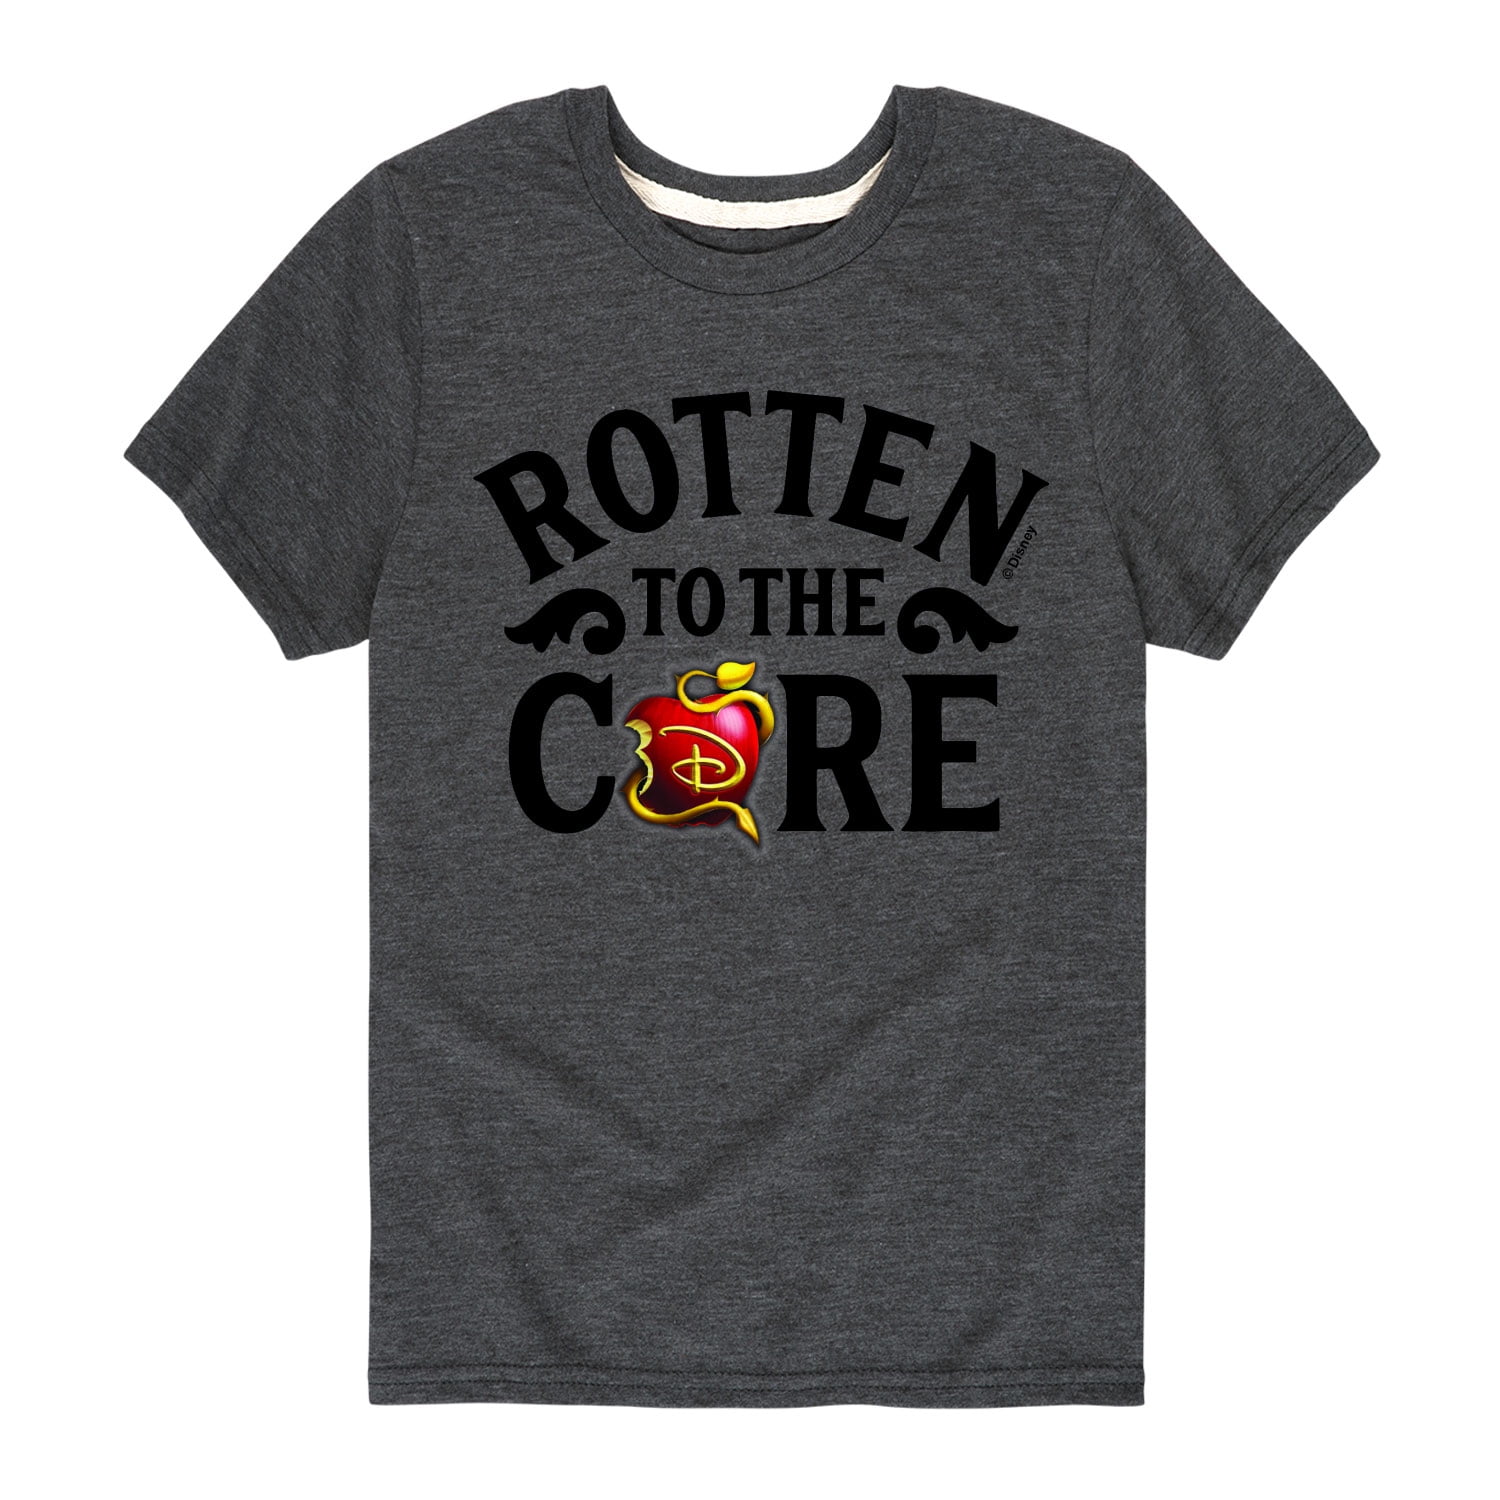 Rotten to the Core Kids T-Shirt for Sale by kaitied456